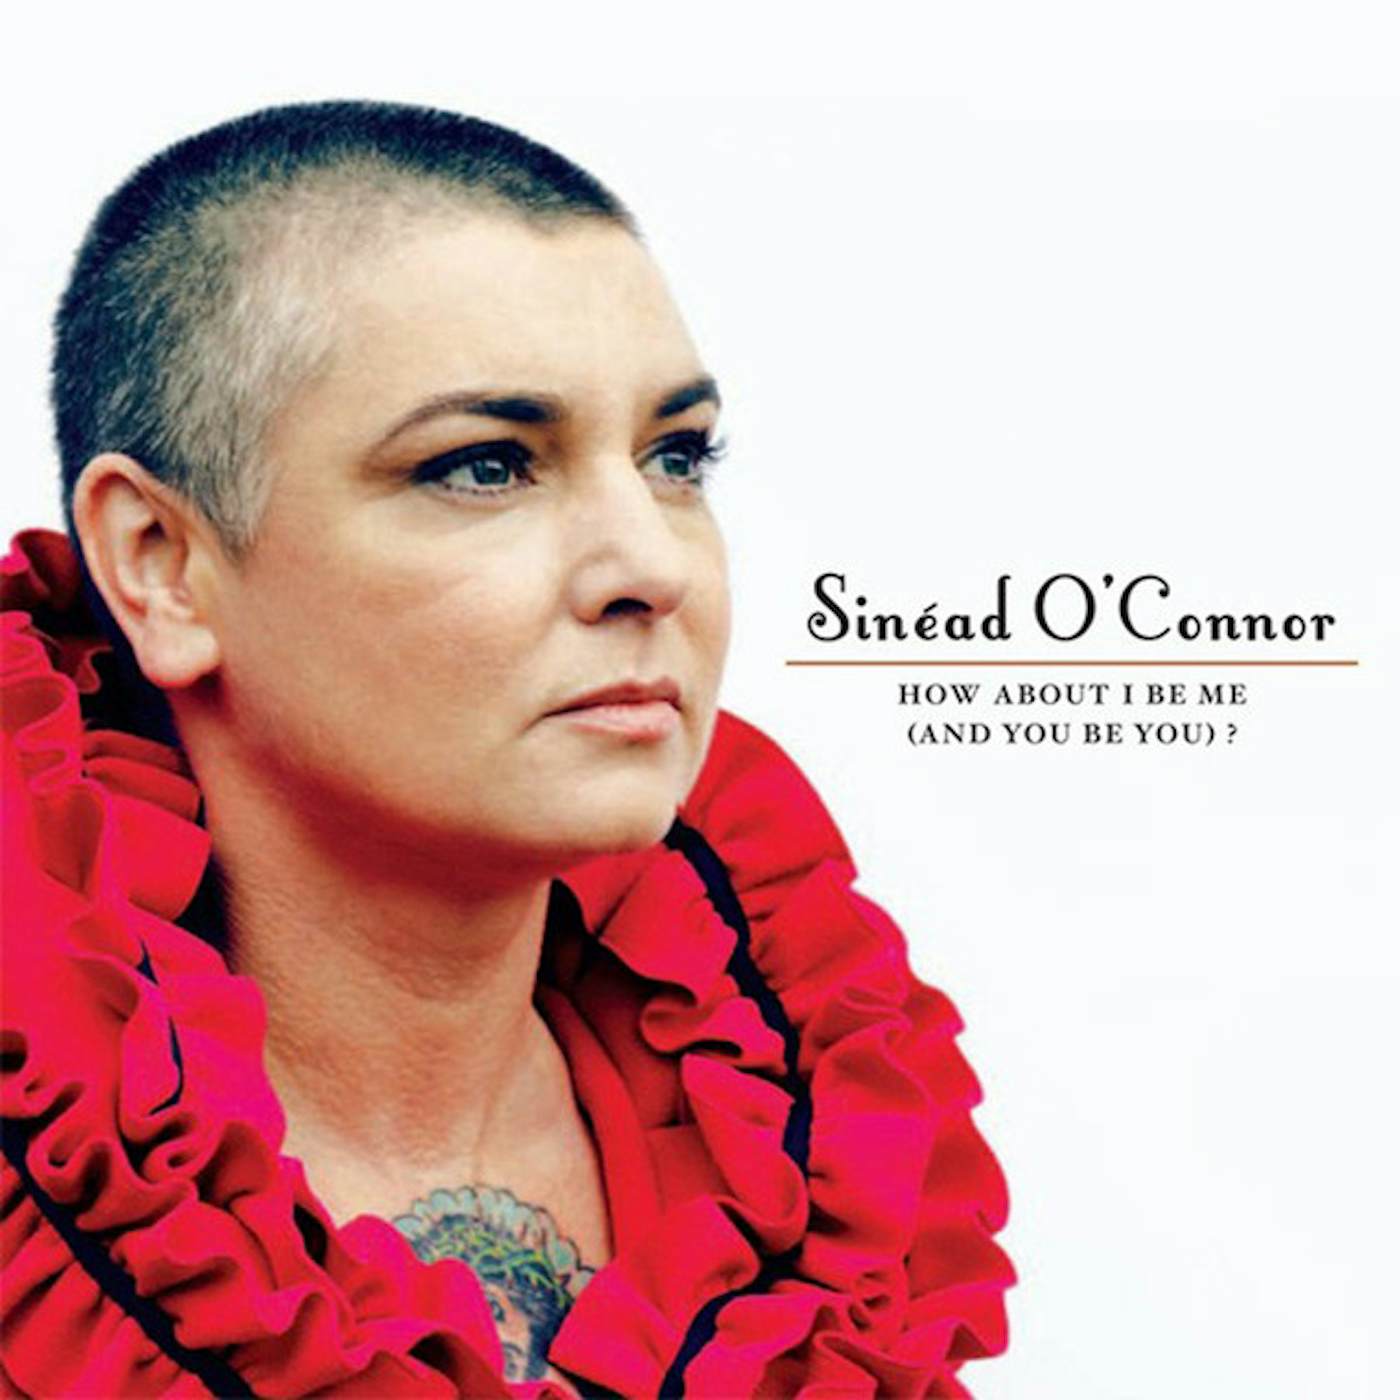 Sinéad O'Connor HOW ABOUT I BE ME (AND YOU BE YOU) Vinyl Record